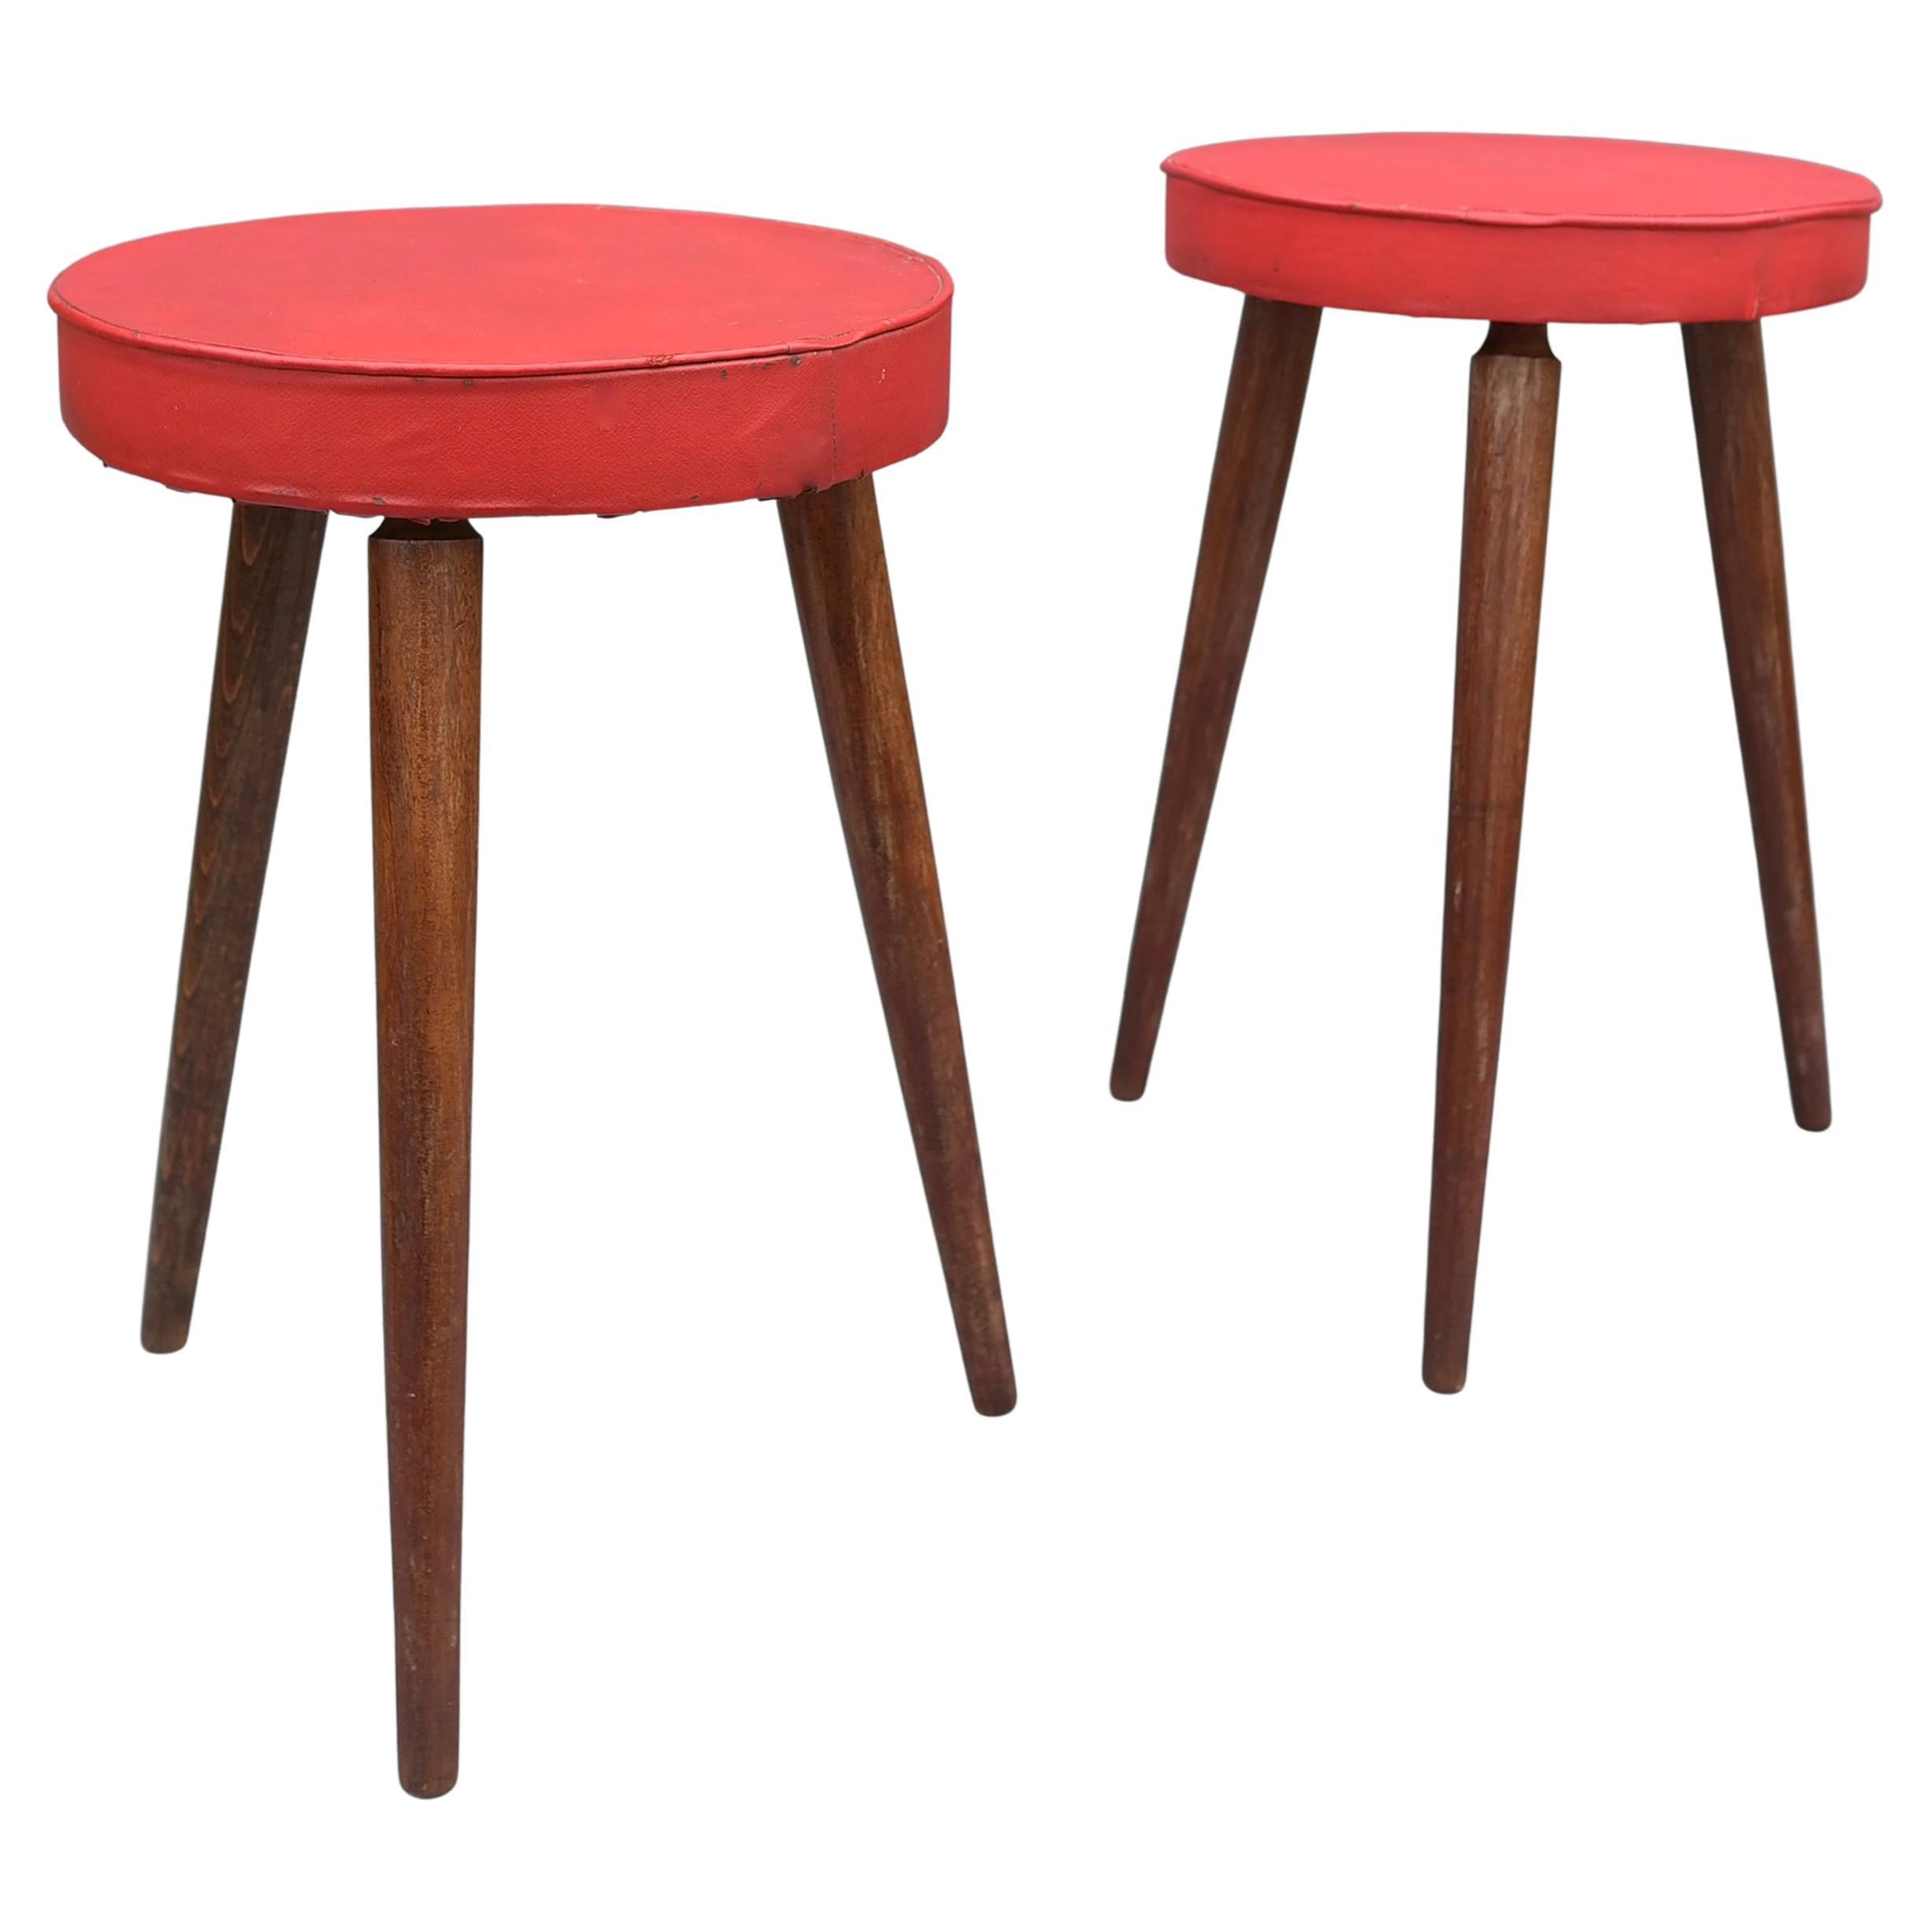 Pair of Solid Oak Stools with Red Vinyl Seats, France, 1960's For Sale